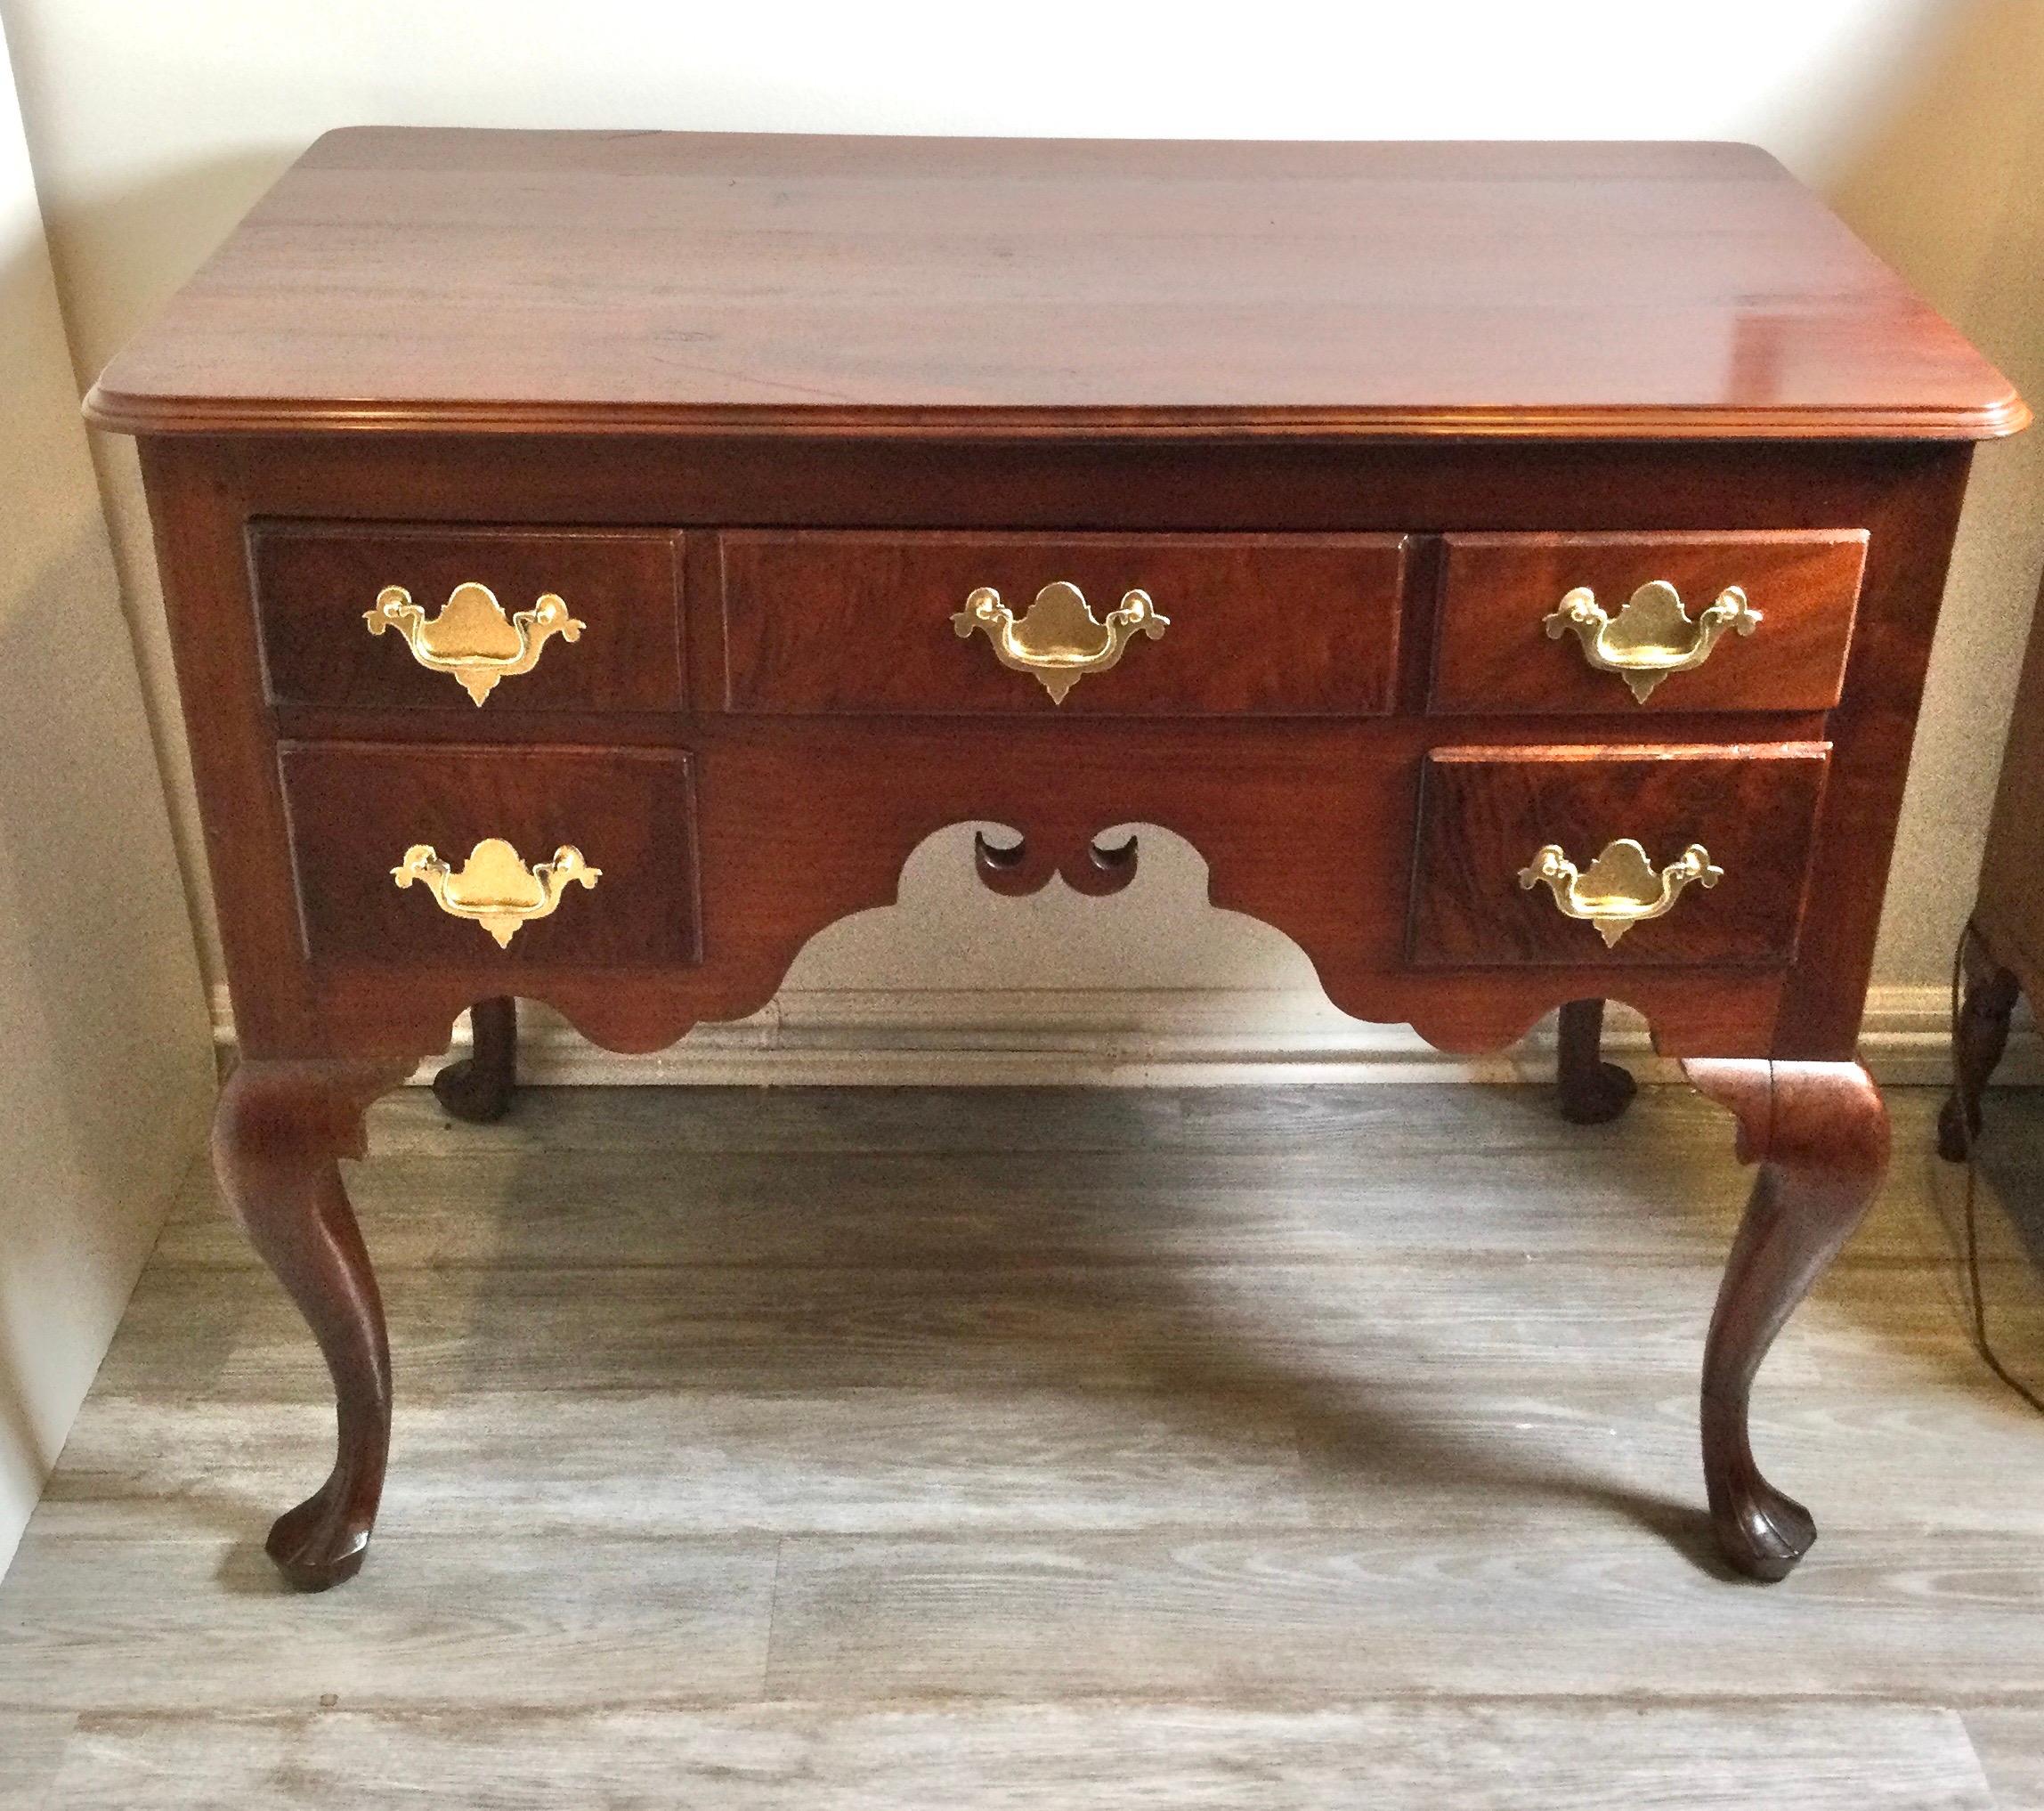 A classic American Queen Anne walnut lowboy with brass hardware. The shapely apron with three upper drawers with two smaller drawers below. The graceful legs with trifoot and stocking feet.